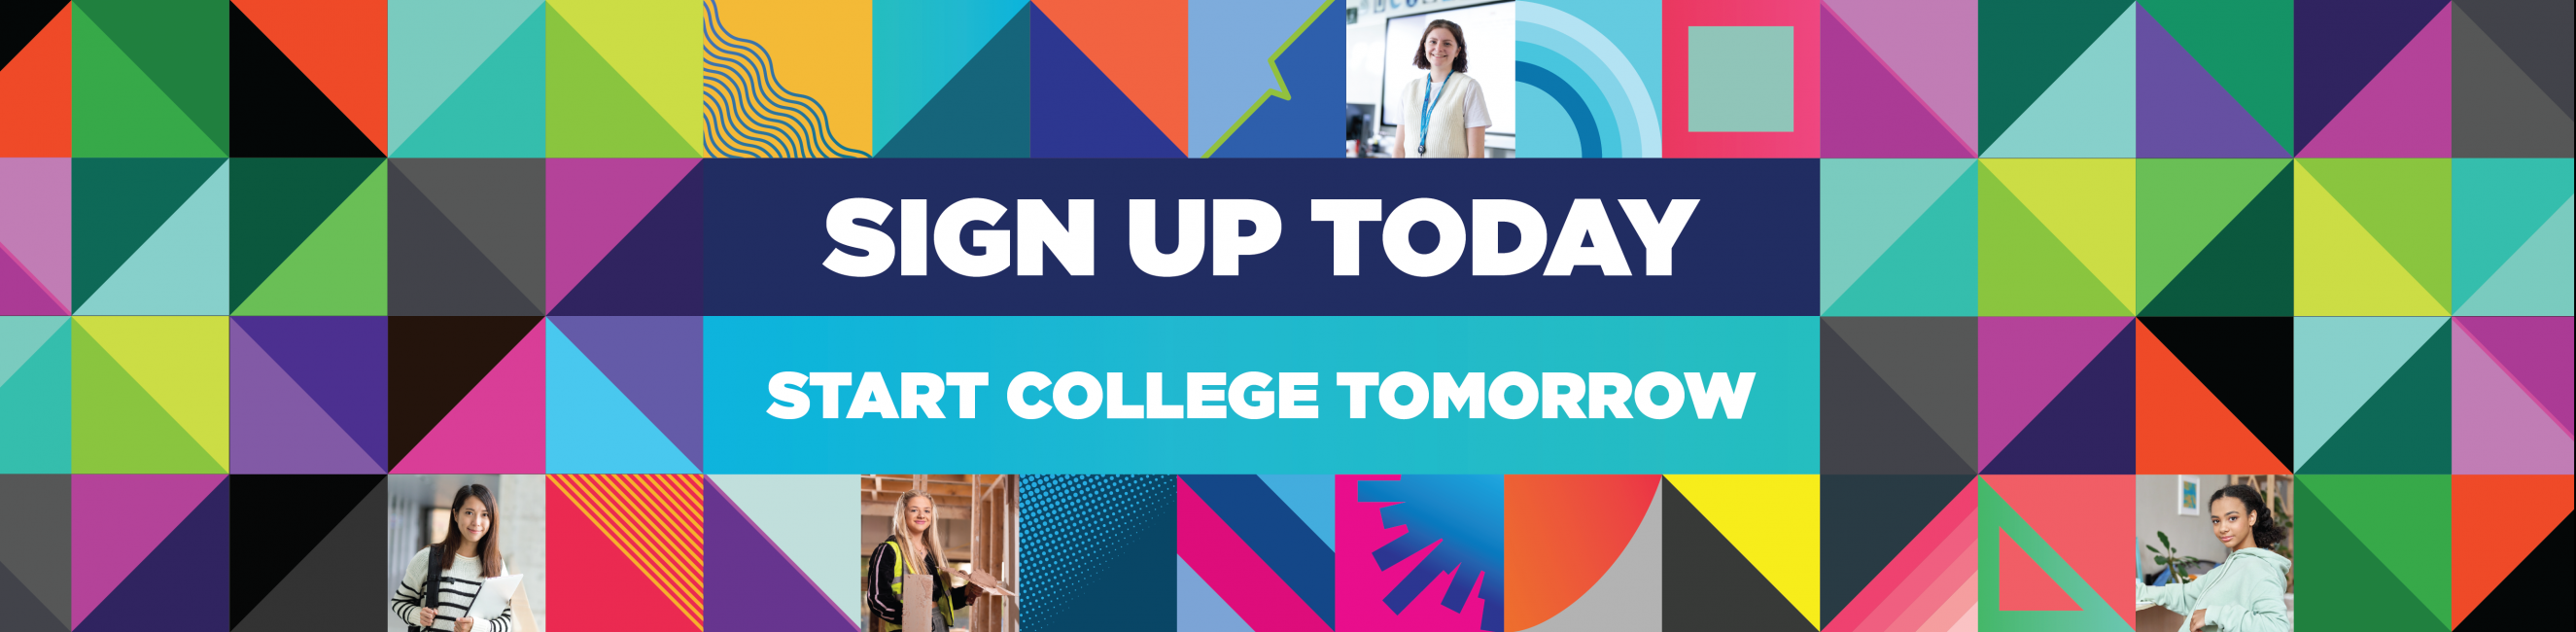 SIGN UP TODAY - START COLLEGE TOMORROW graphic